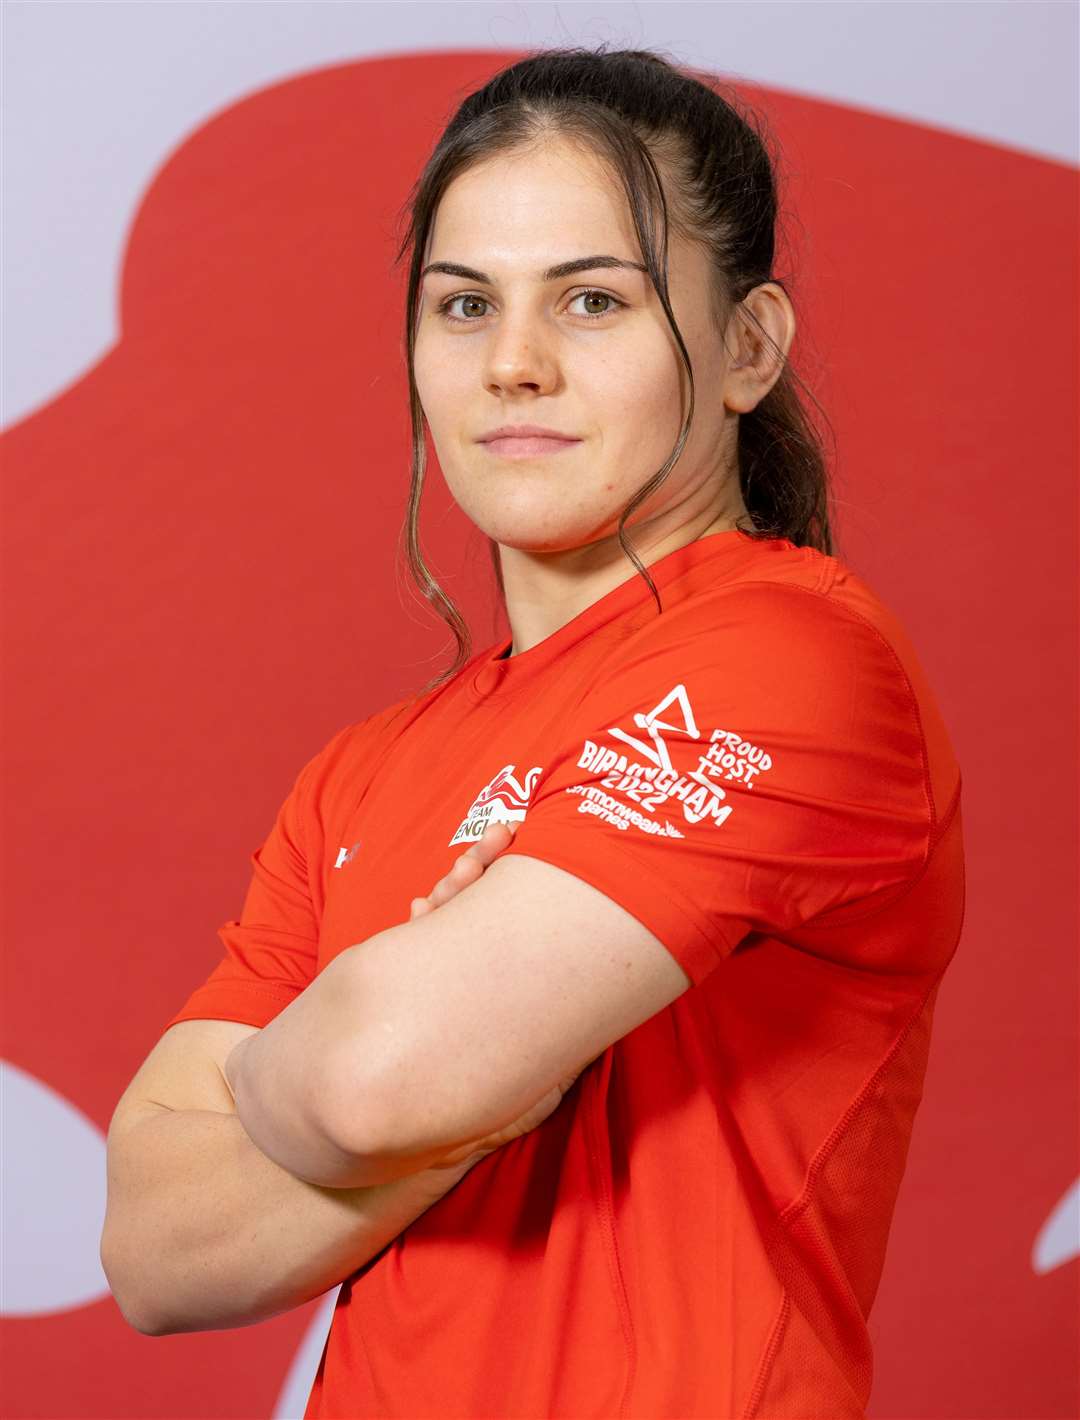 Katie-Jemima Yeats-Brown will represent Team GB in the judo at the Paris 2024 Olympic Games. Photo: Sam Mellish / Team England